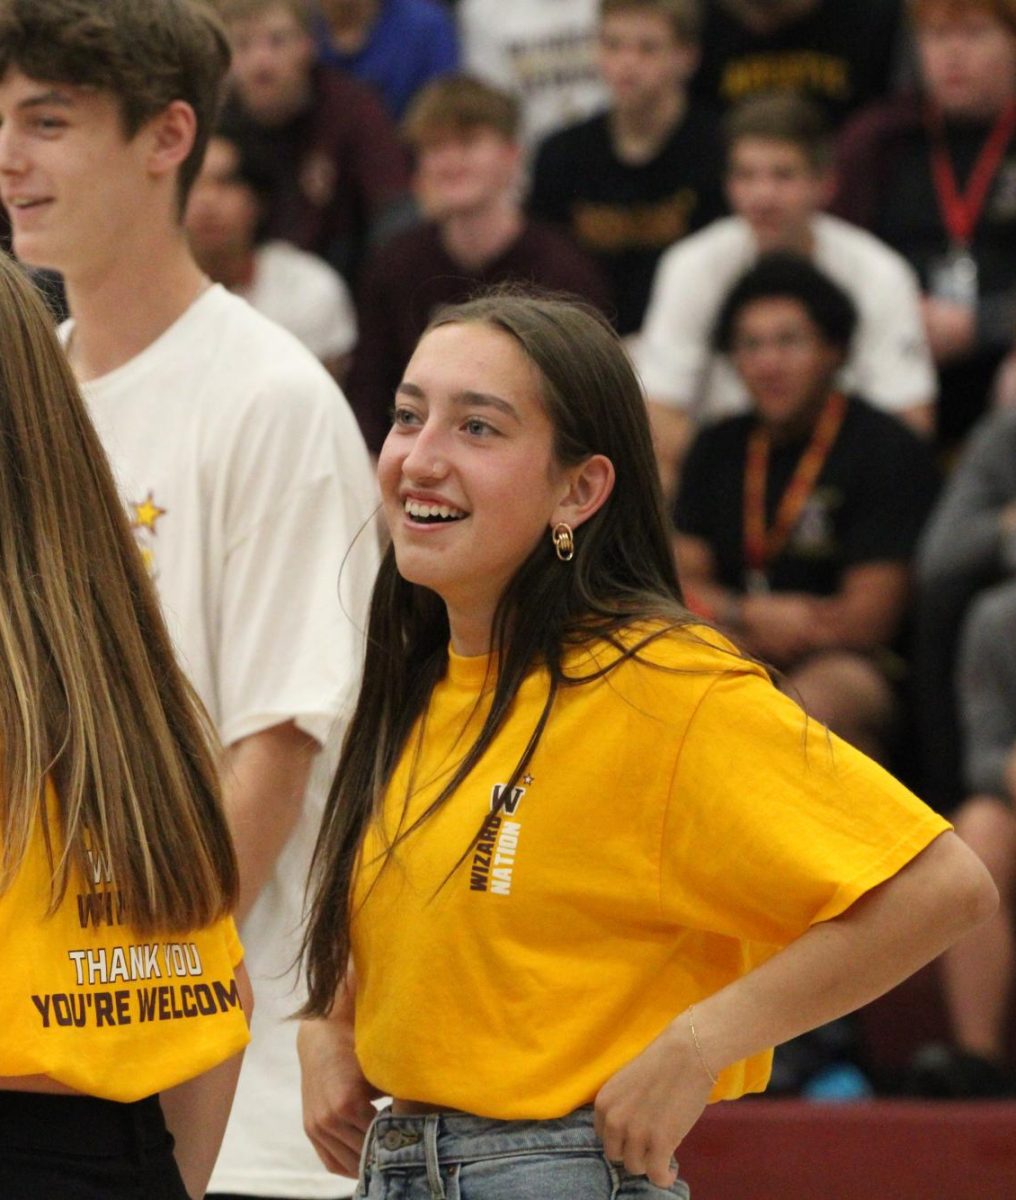 Leah Bacon smiles while working with Student Council during the homecoming week assembly. SECOND SENTENCE NEEDED.